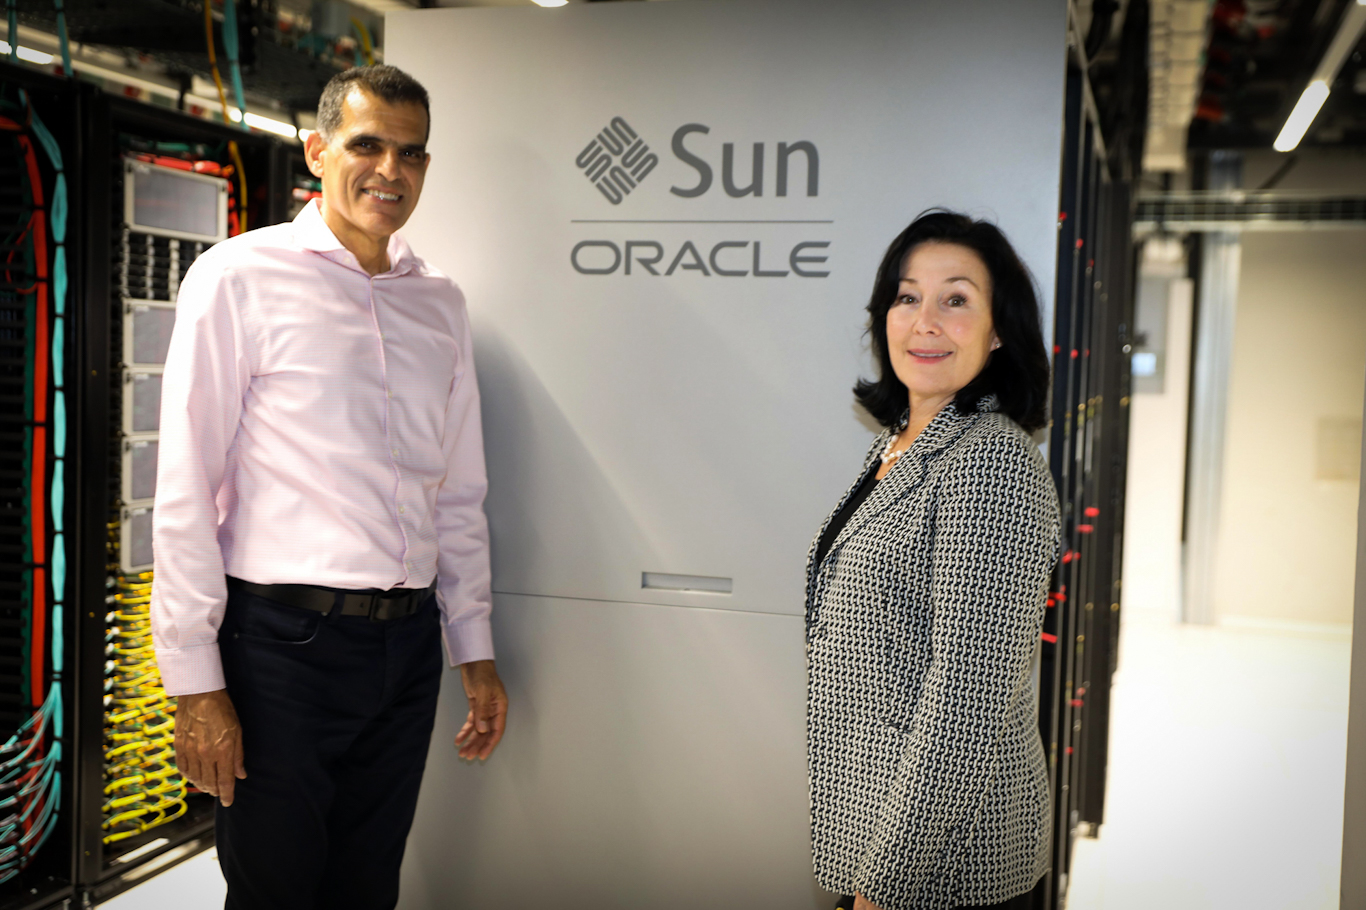 Safra Catz, Oracle’s CEO, poses with Alon Ben (left), CEO of Tel-Aviv-based Oracle data partner, Bynet